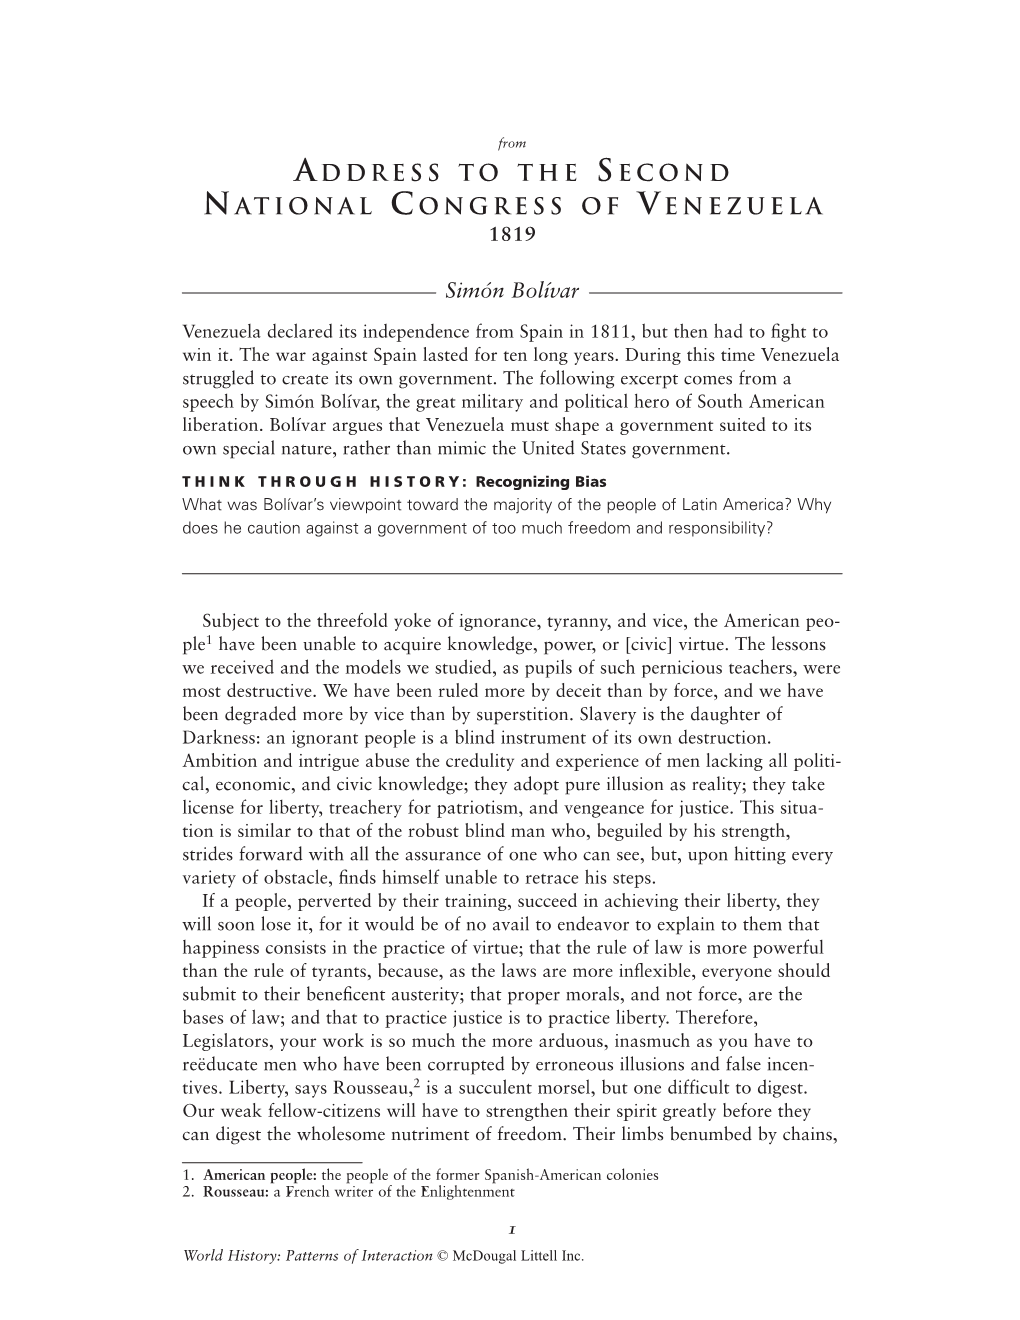 From Address to the Second National Congress of Venezuela